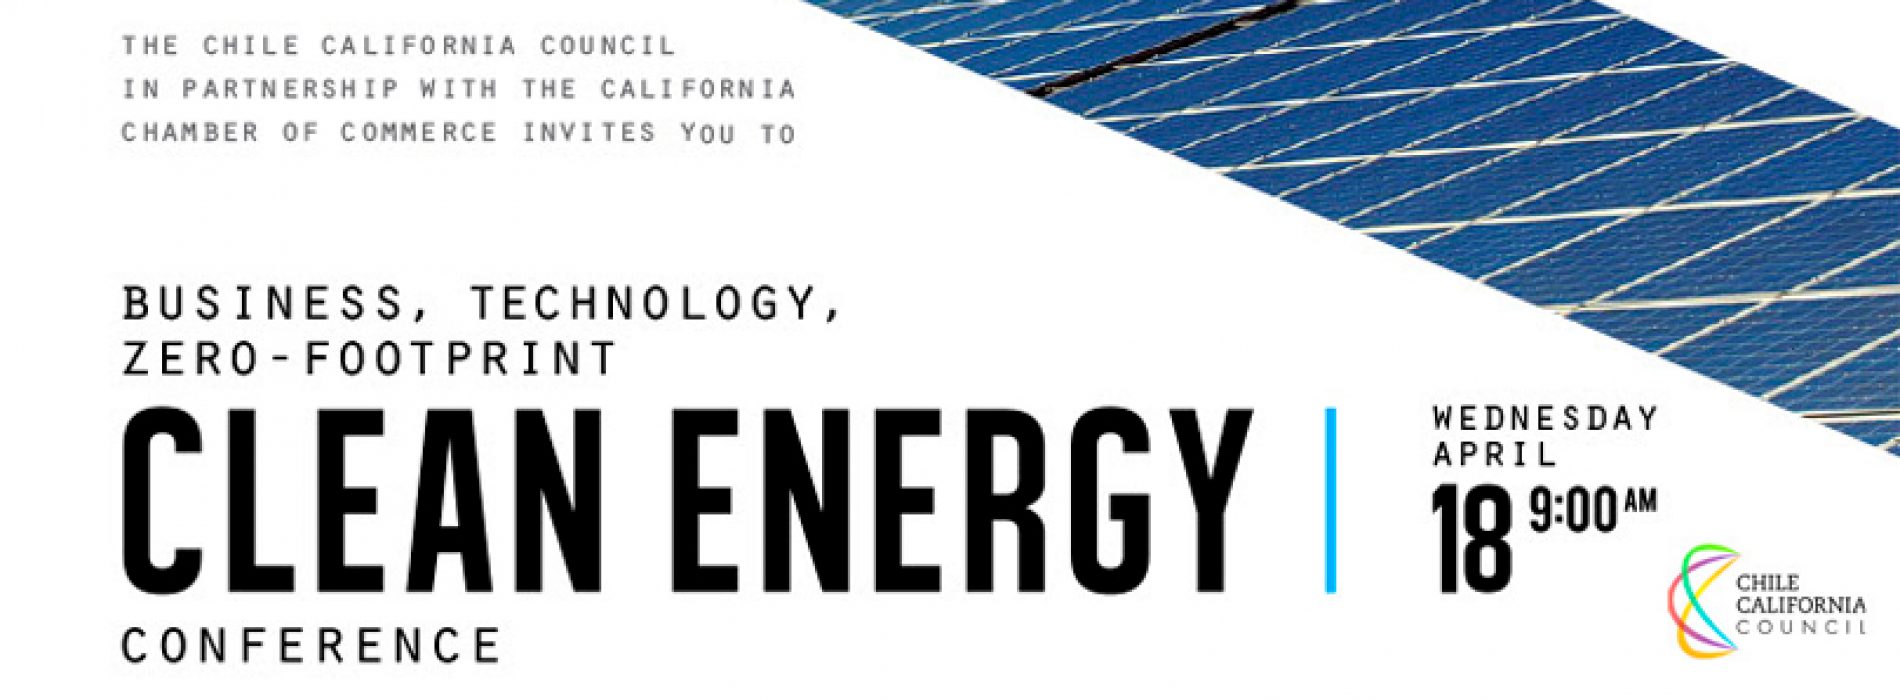 Meet and Learn from Clean Energy Business Experts About Opportunities in California and Chile